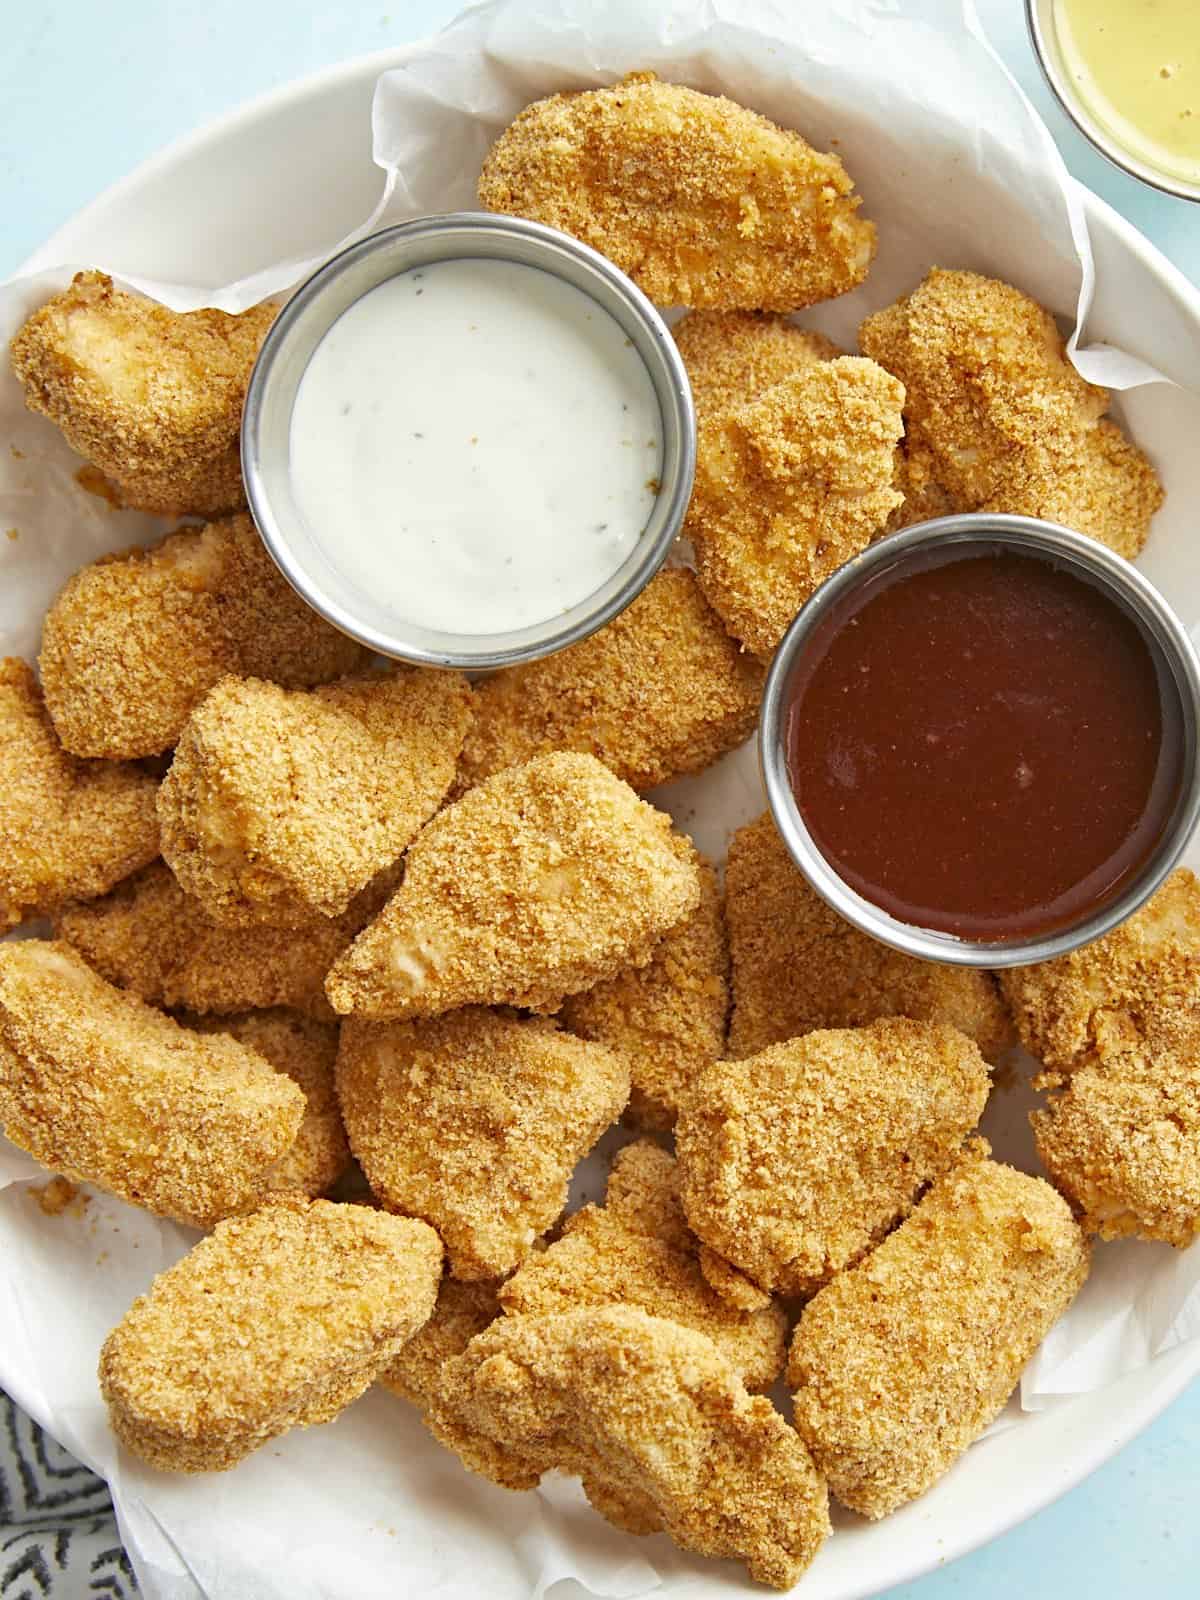 How to air fry Great Value Breaded Chicken Nuggets – Air Fry Guide